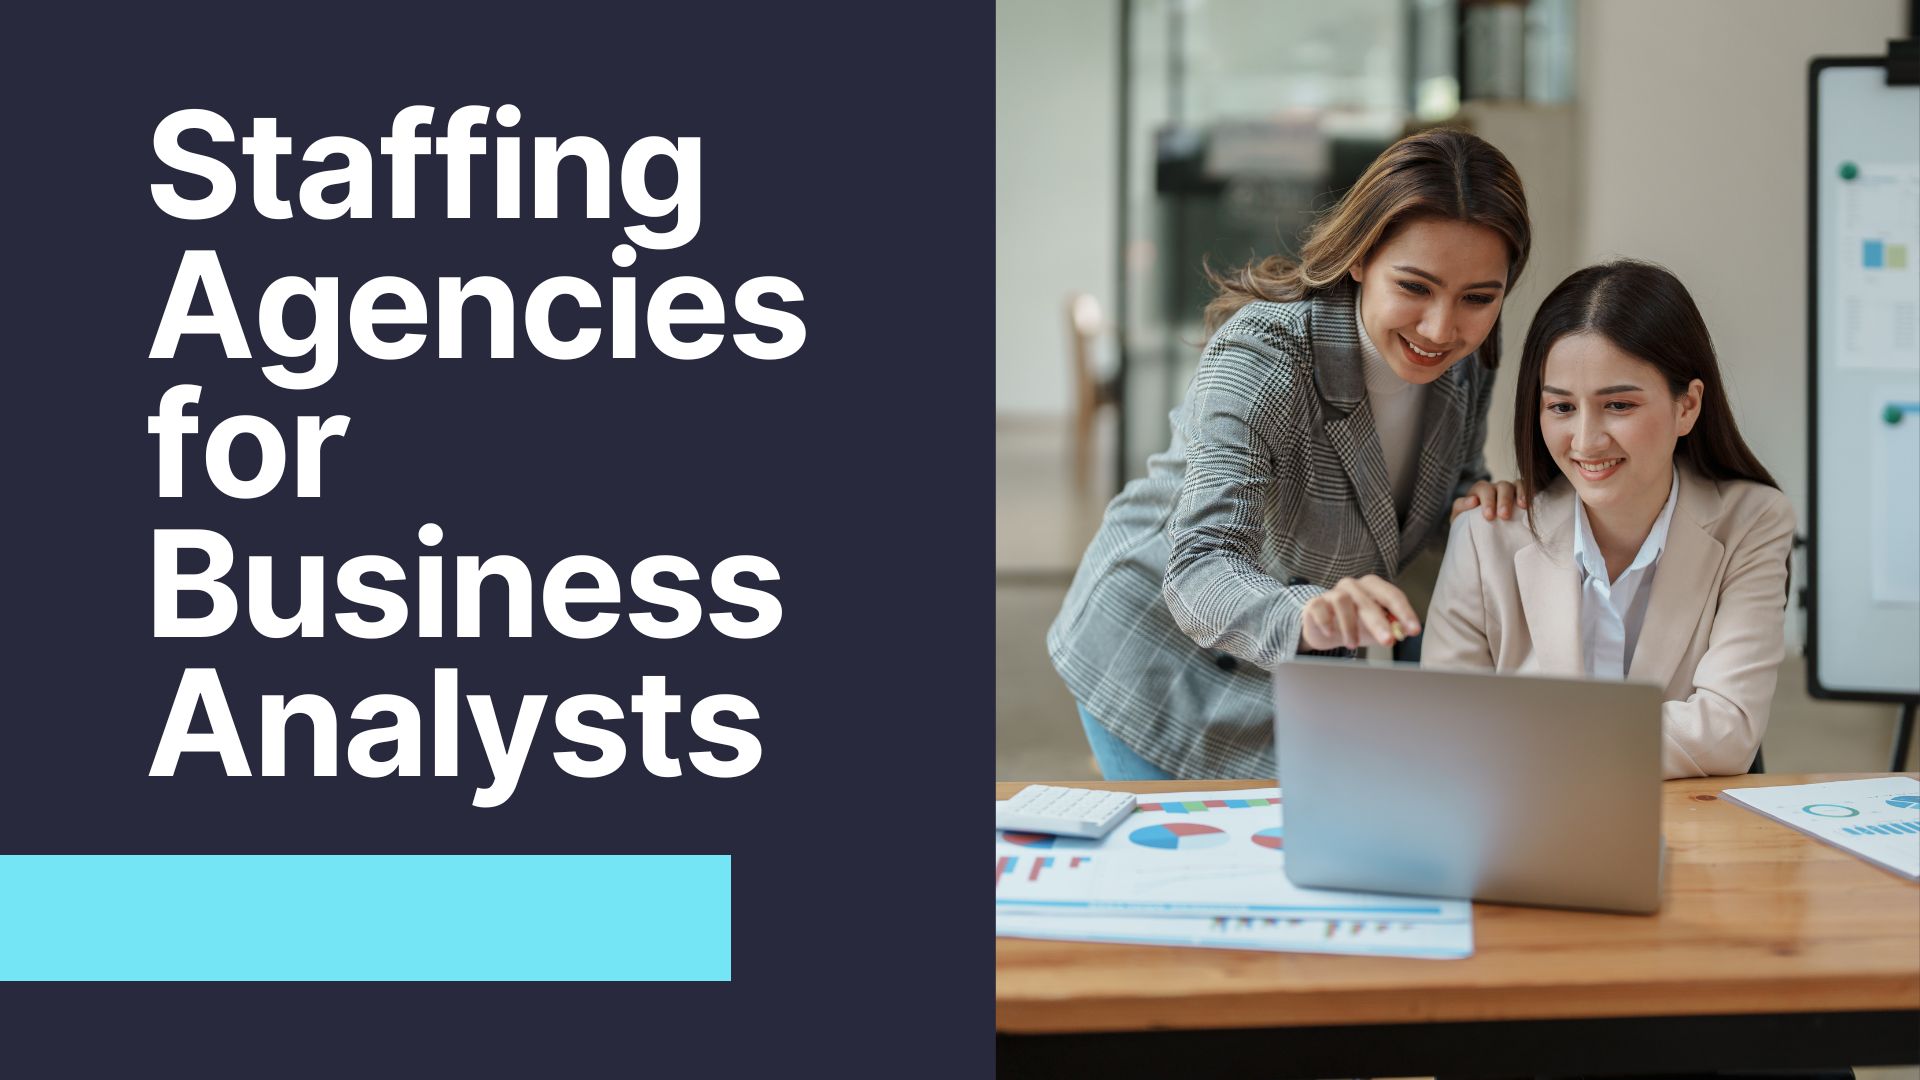 Staffing Agencies for Business Analysts